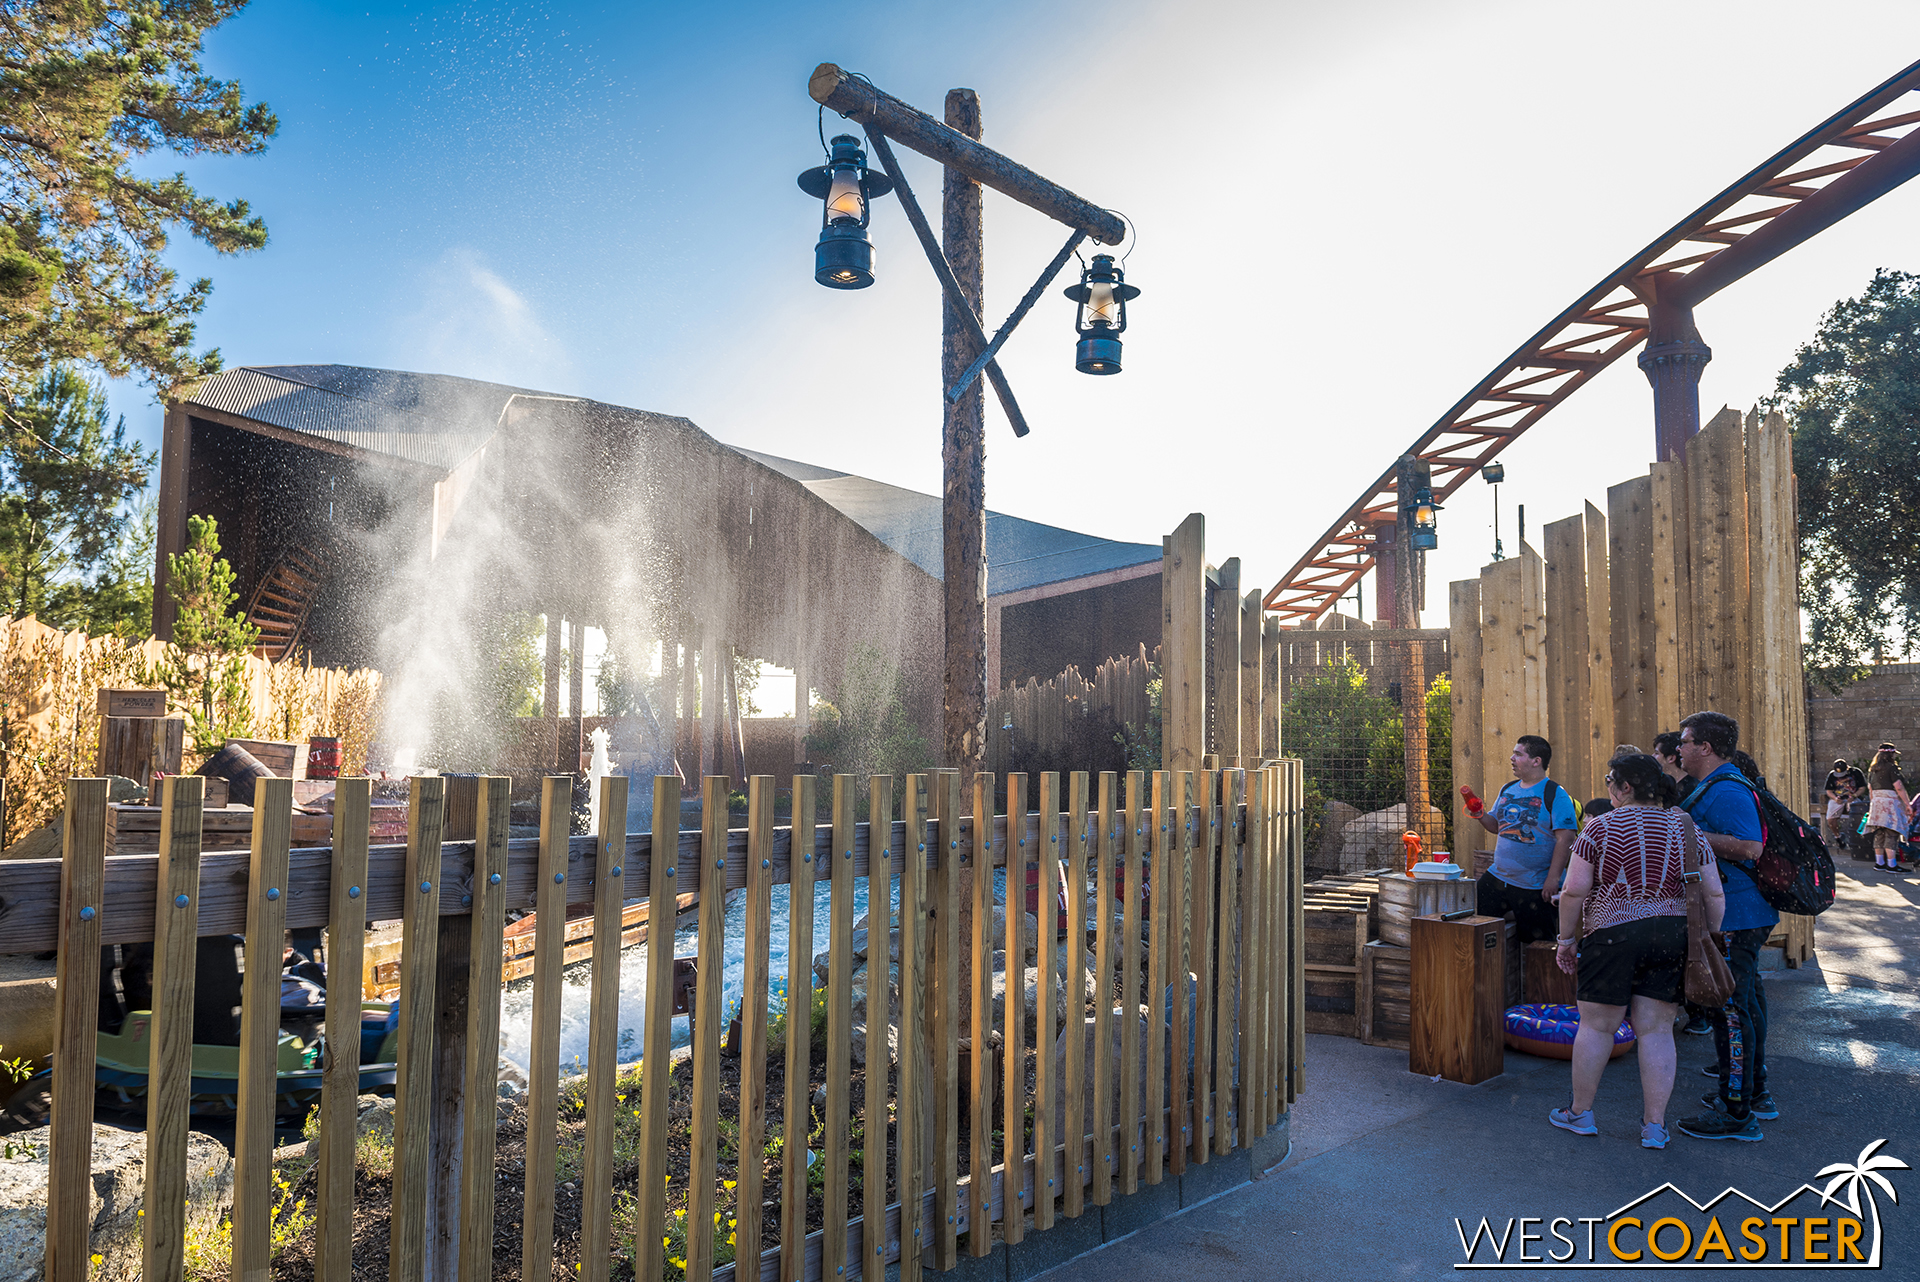  Guests along the outside control the blasts, and the experience is free to play.  But beware—sometimes, the system backfires, and the bystanders are the ones who are sprayed! 